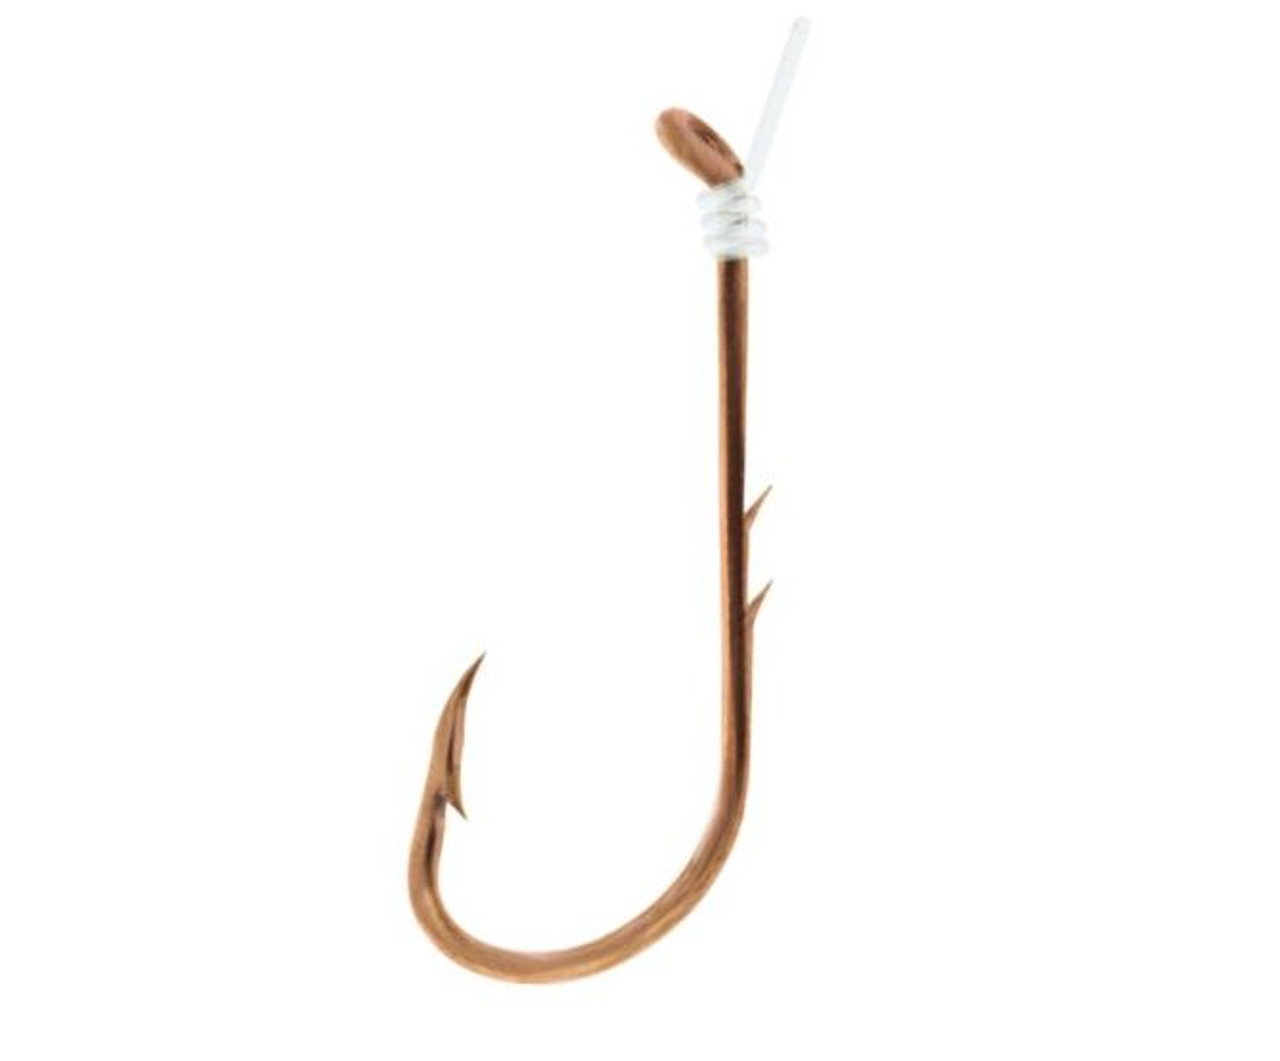 Eagle Claw Lake & Stream Snelled Hook Size 8 6pk - Kinsey's Outdoors